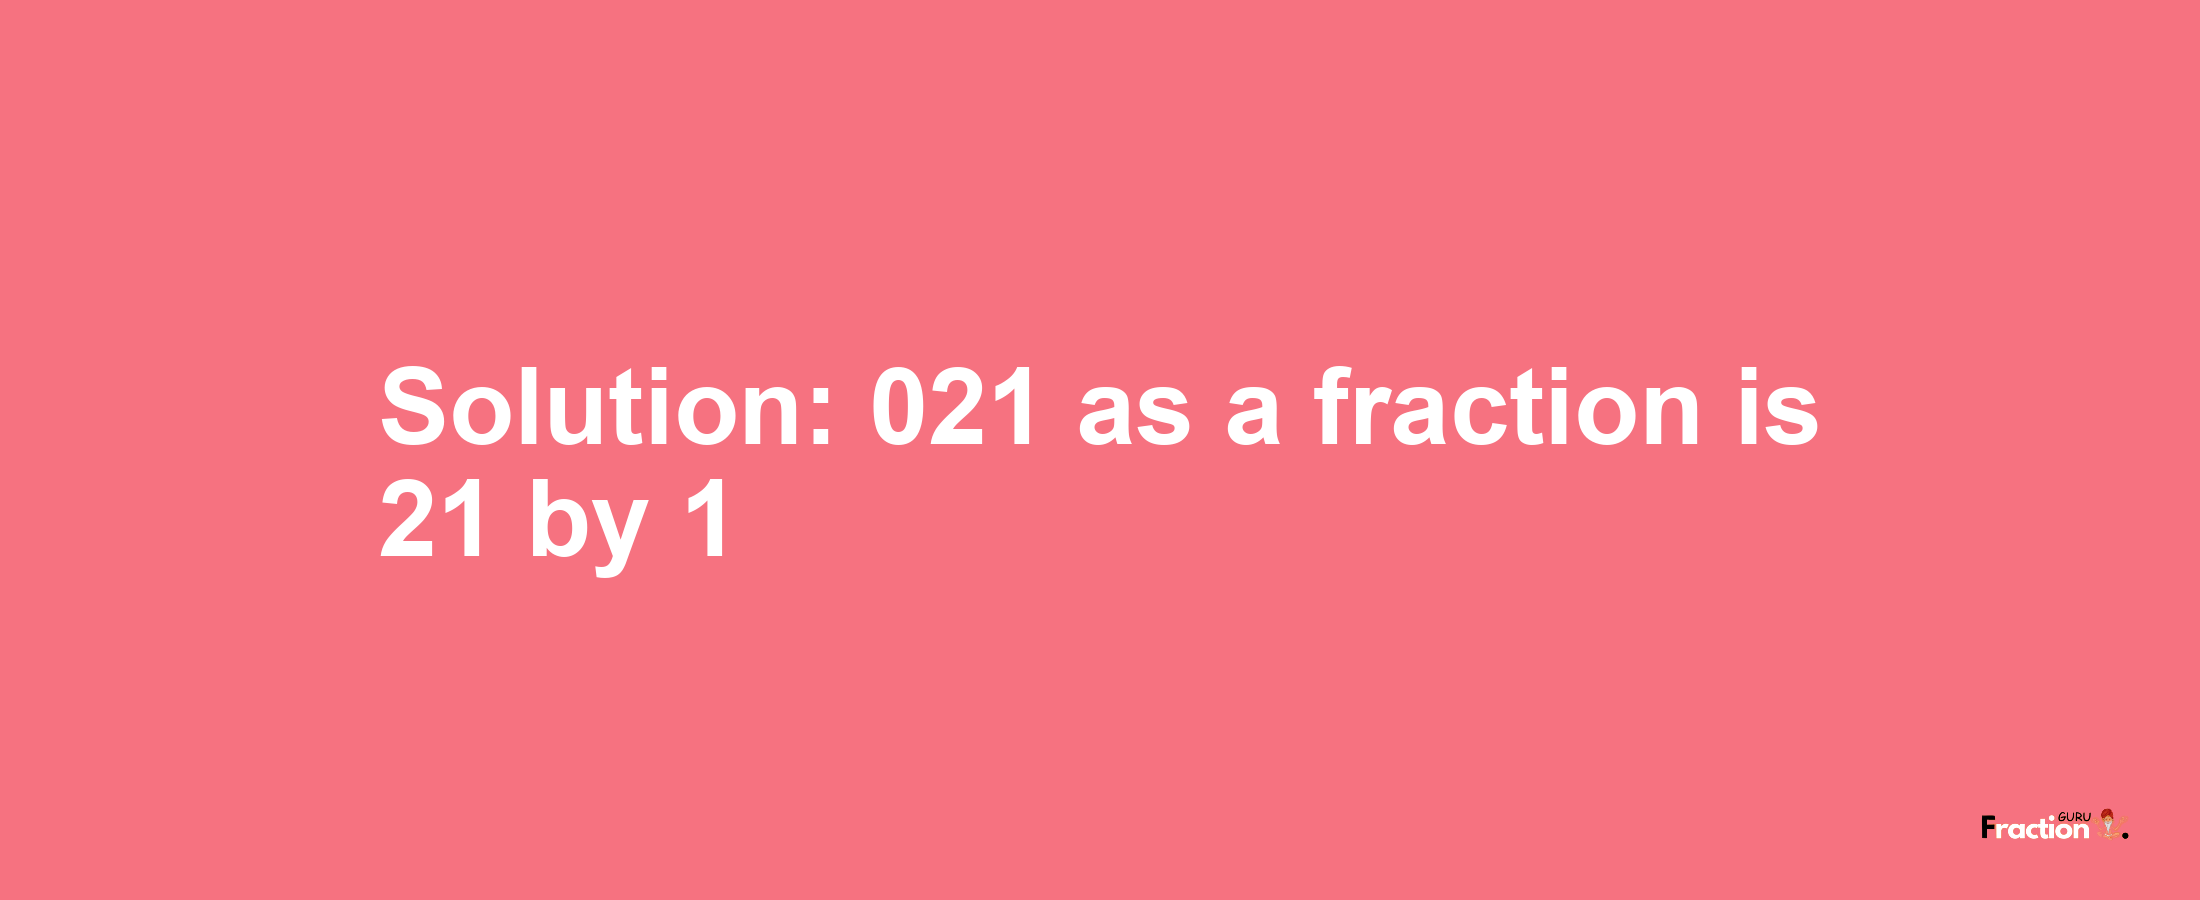 Solution:021 as a fraction is 21/1